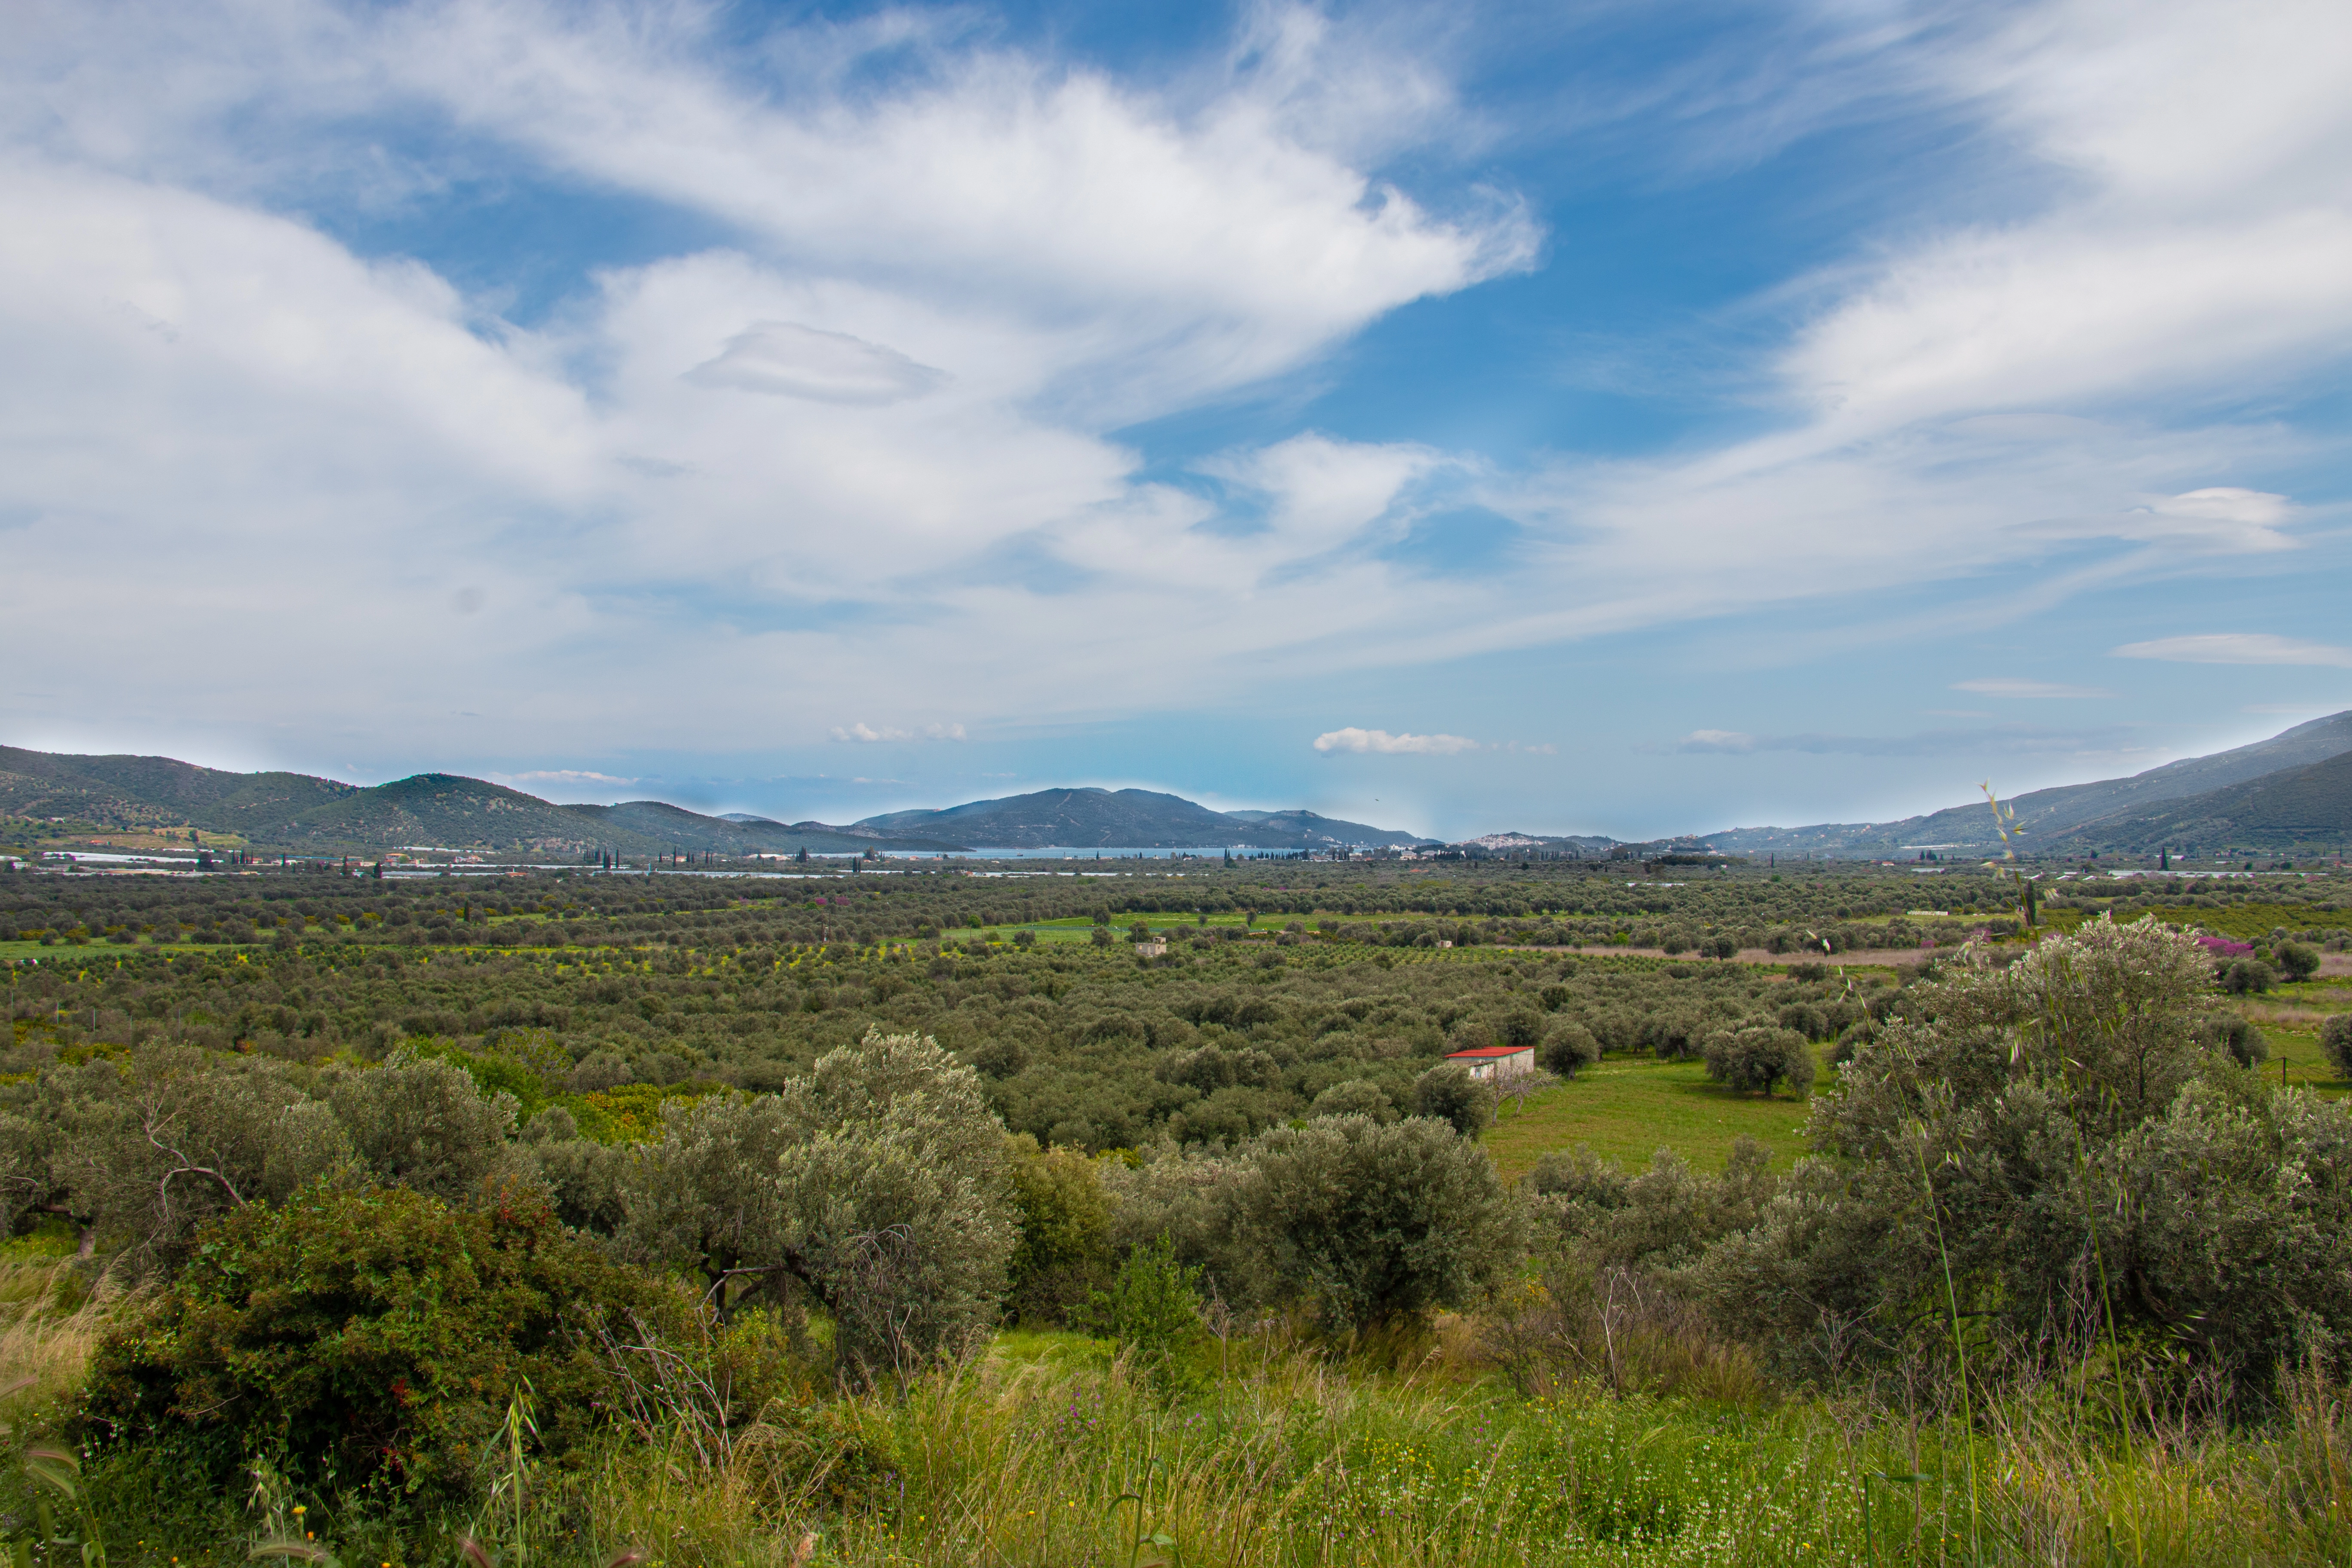 View of Theseus olive groves and Poros Bay